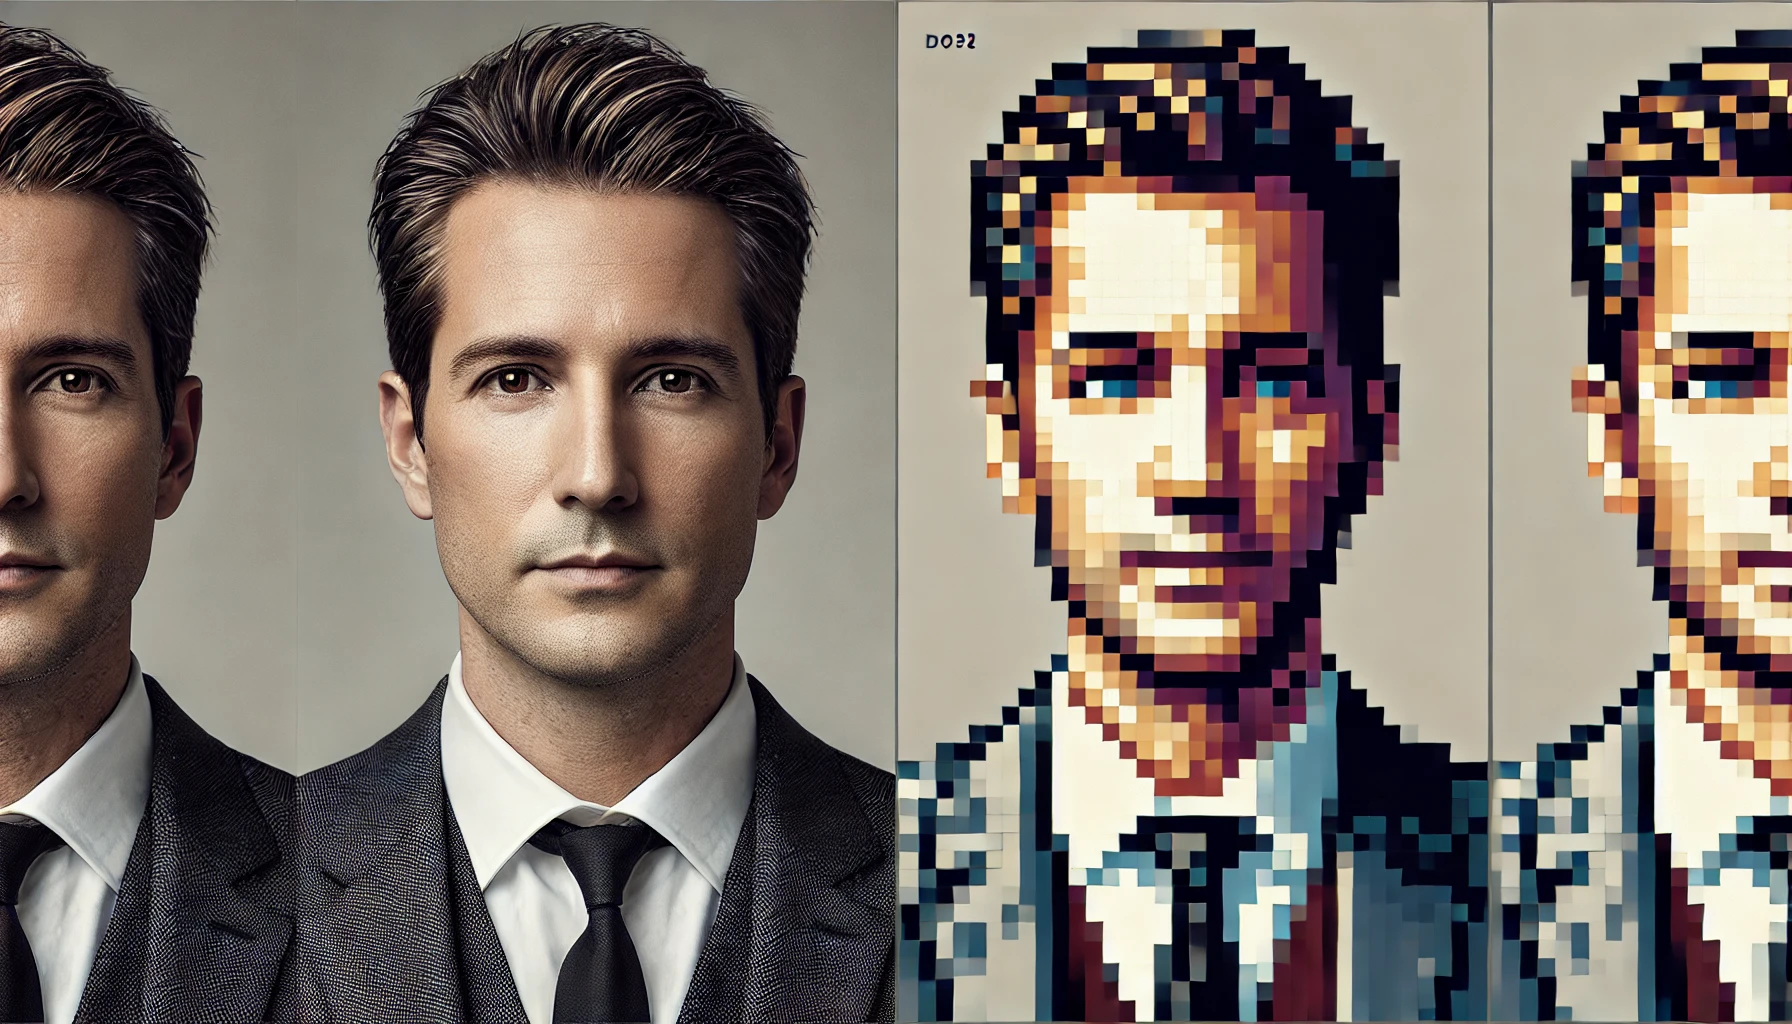 A diptych showcasing a photorealistic portrait of a middle-aged man in a suit and tie on the left, and an AI-generated pixel art rendition of the same portrait on the right. The contrast between the detailed realism and the blocky pixel art highlights the theme of "Artificial Intelligence Arts.